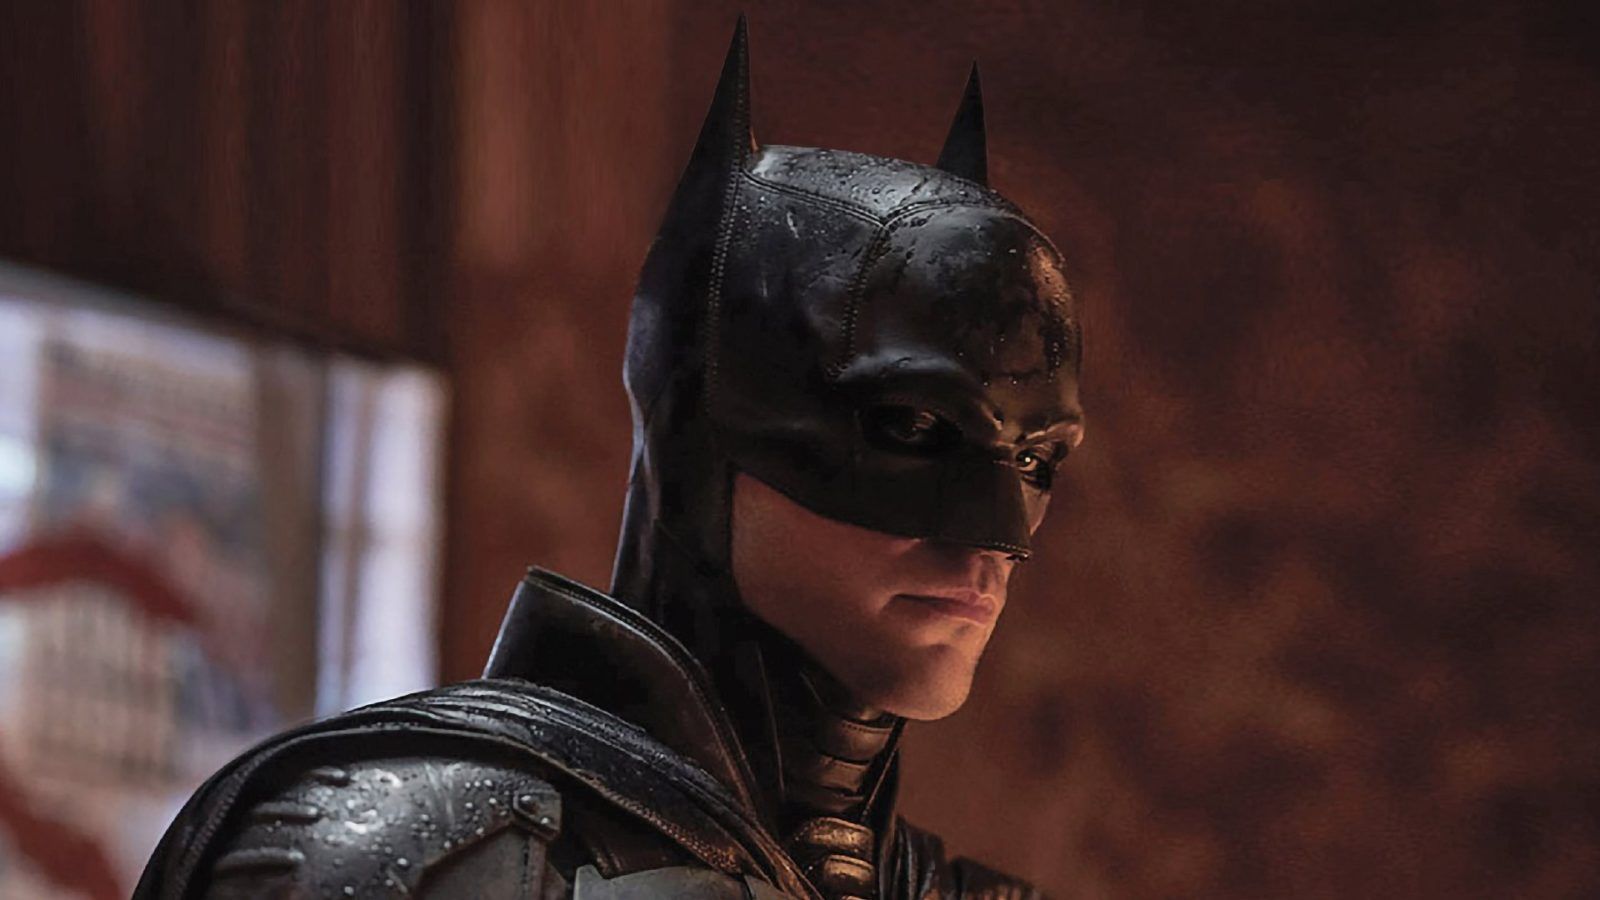 All the Batman movies and shows to watch including Robert Pattinson’s Dark Knight turn